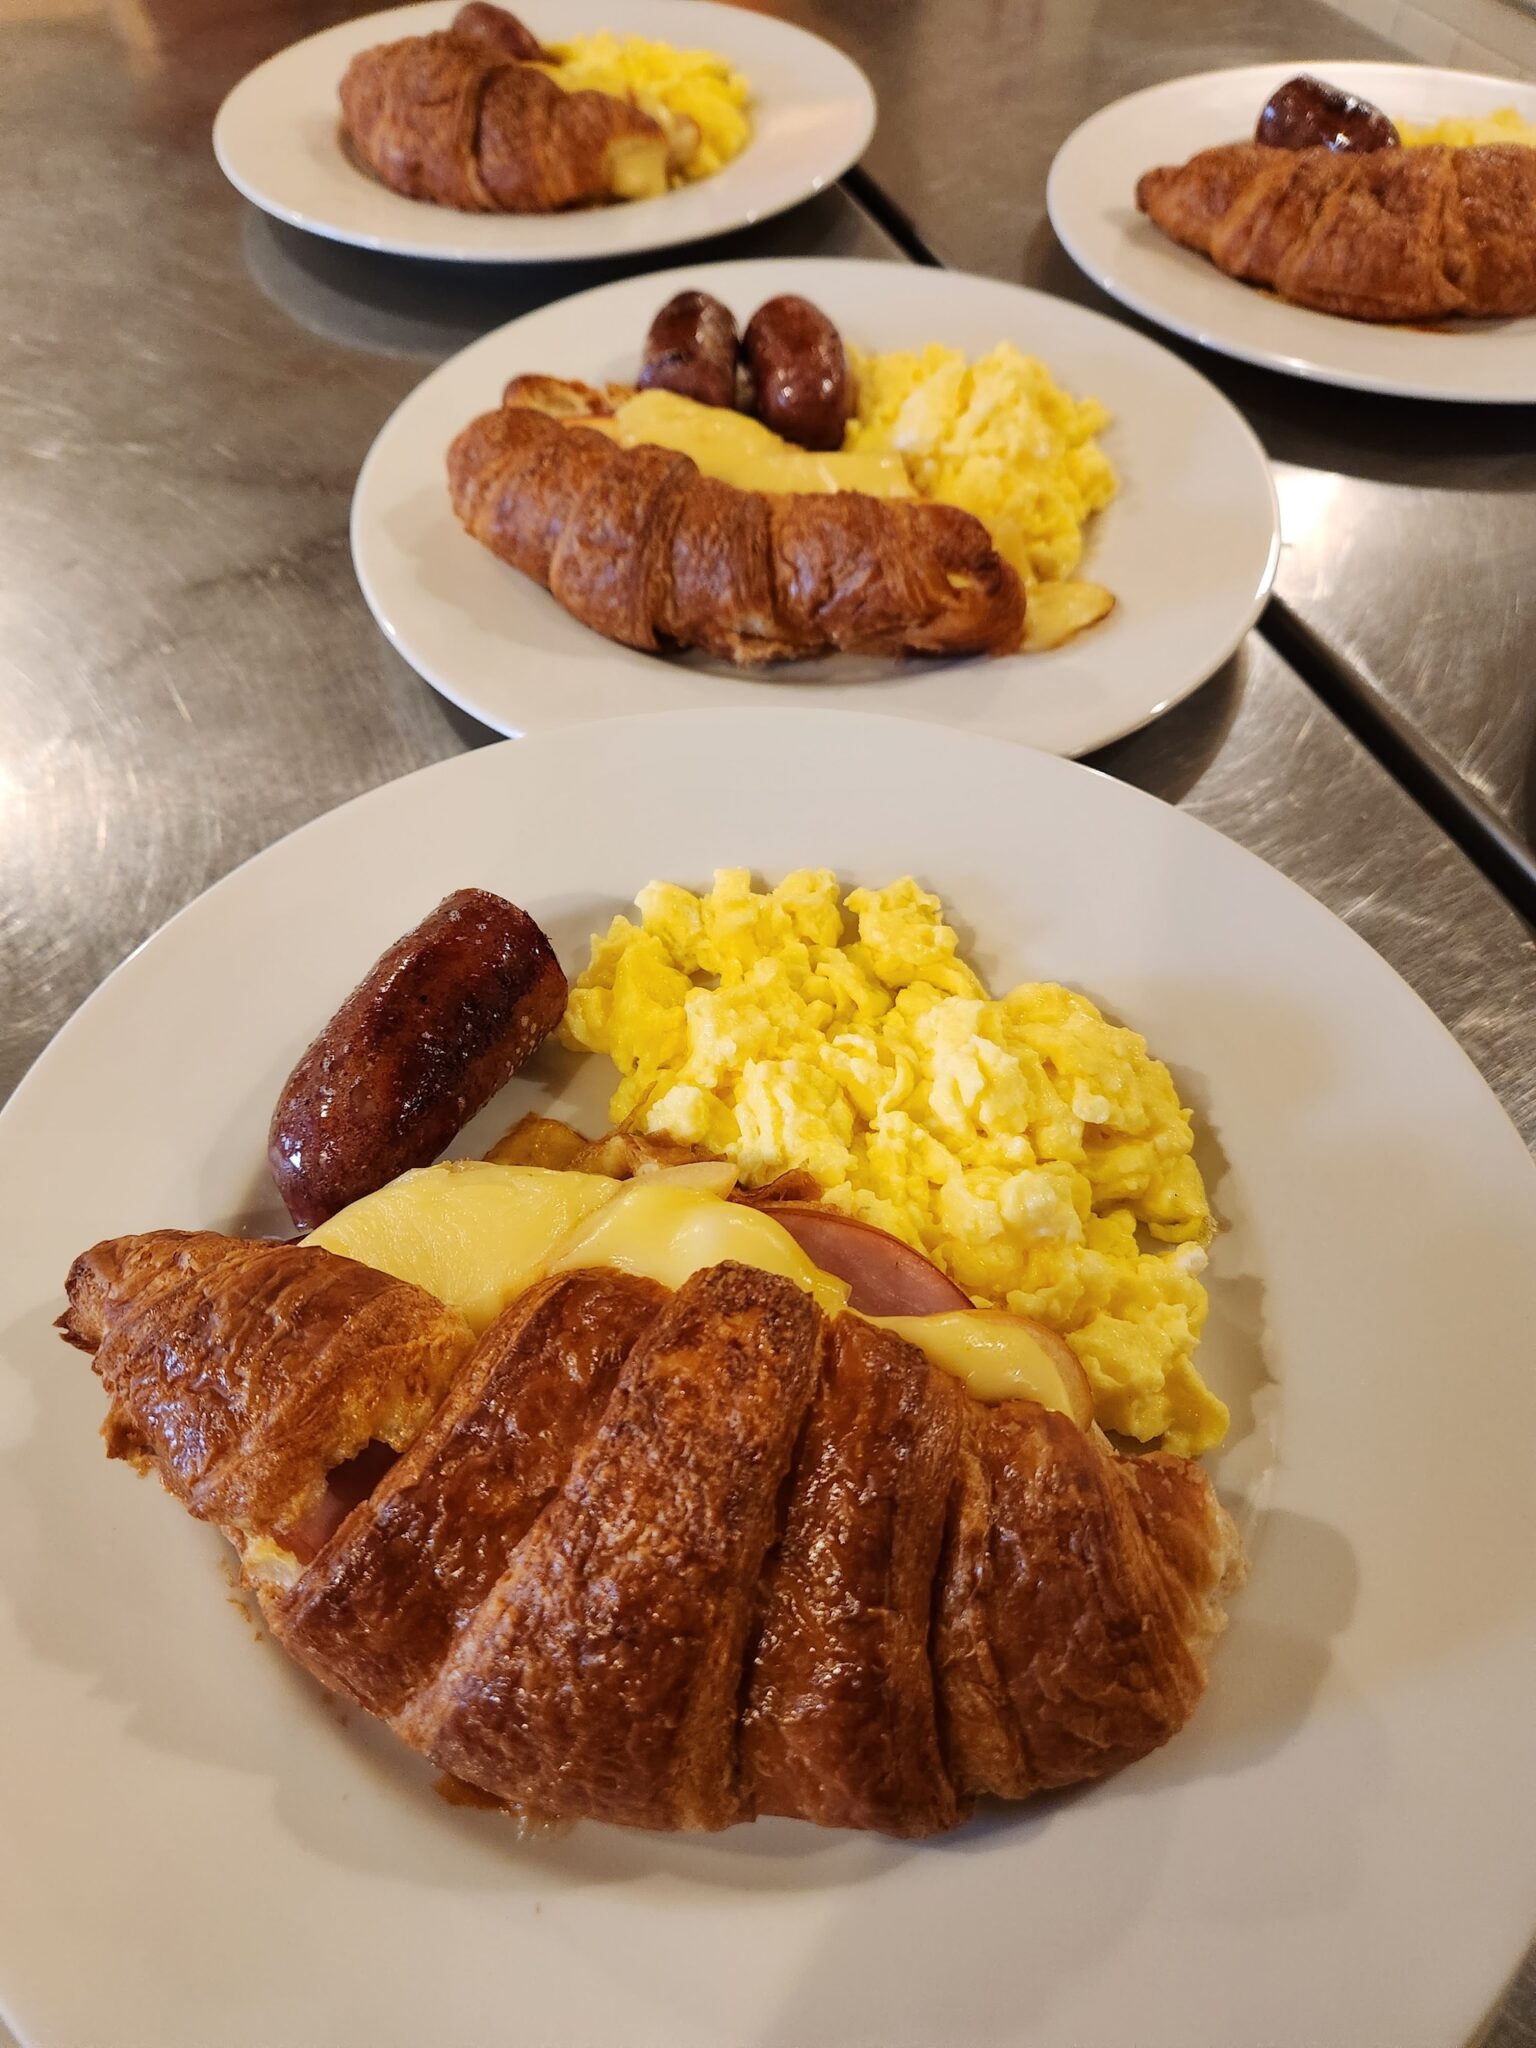 Breakfast of a croissant stuffed with apple, canadian bacon, and gruyere cheese. Accompanied by scrambled eggs and sausage.